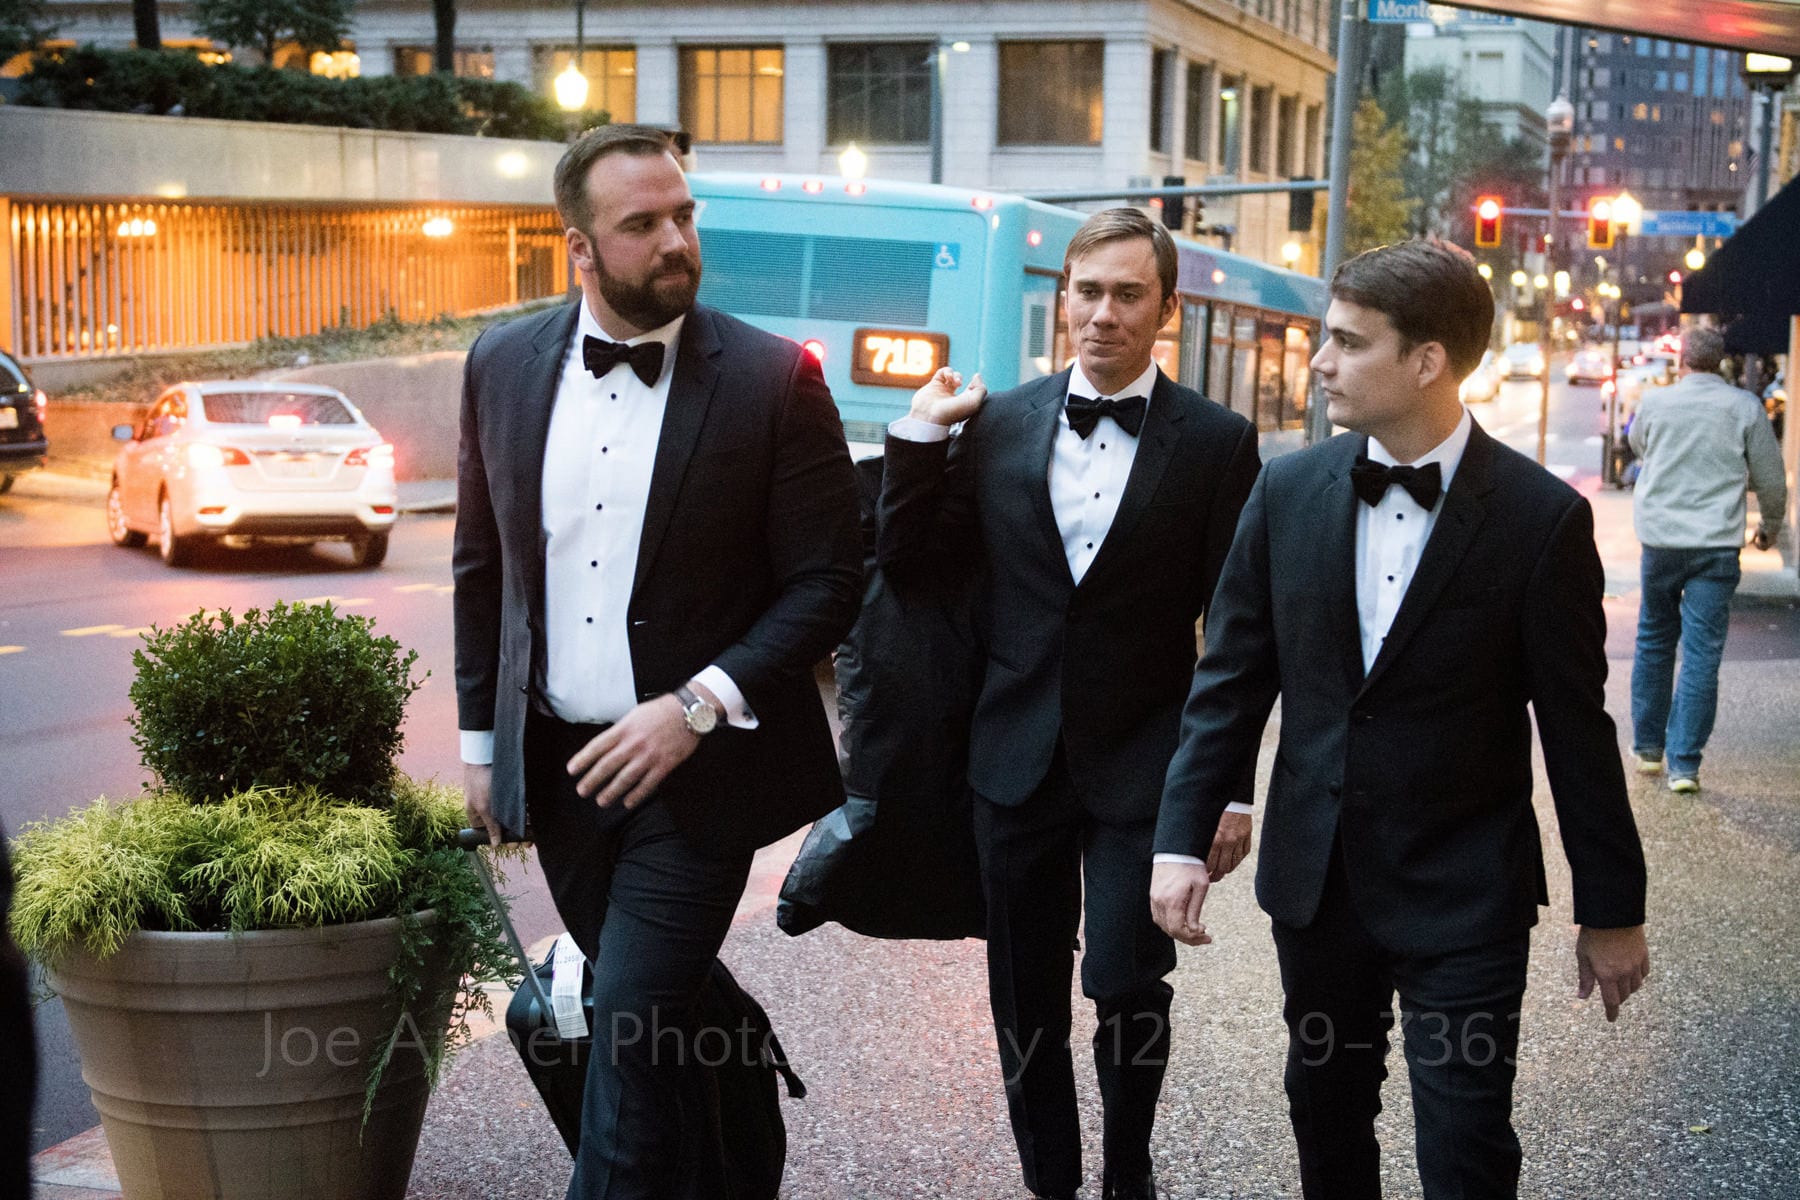 a groom and two groomsmen walk on the street in downtown pittsburgh with the 71B bus in the background to a hotel monaco pittsburgh wedding